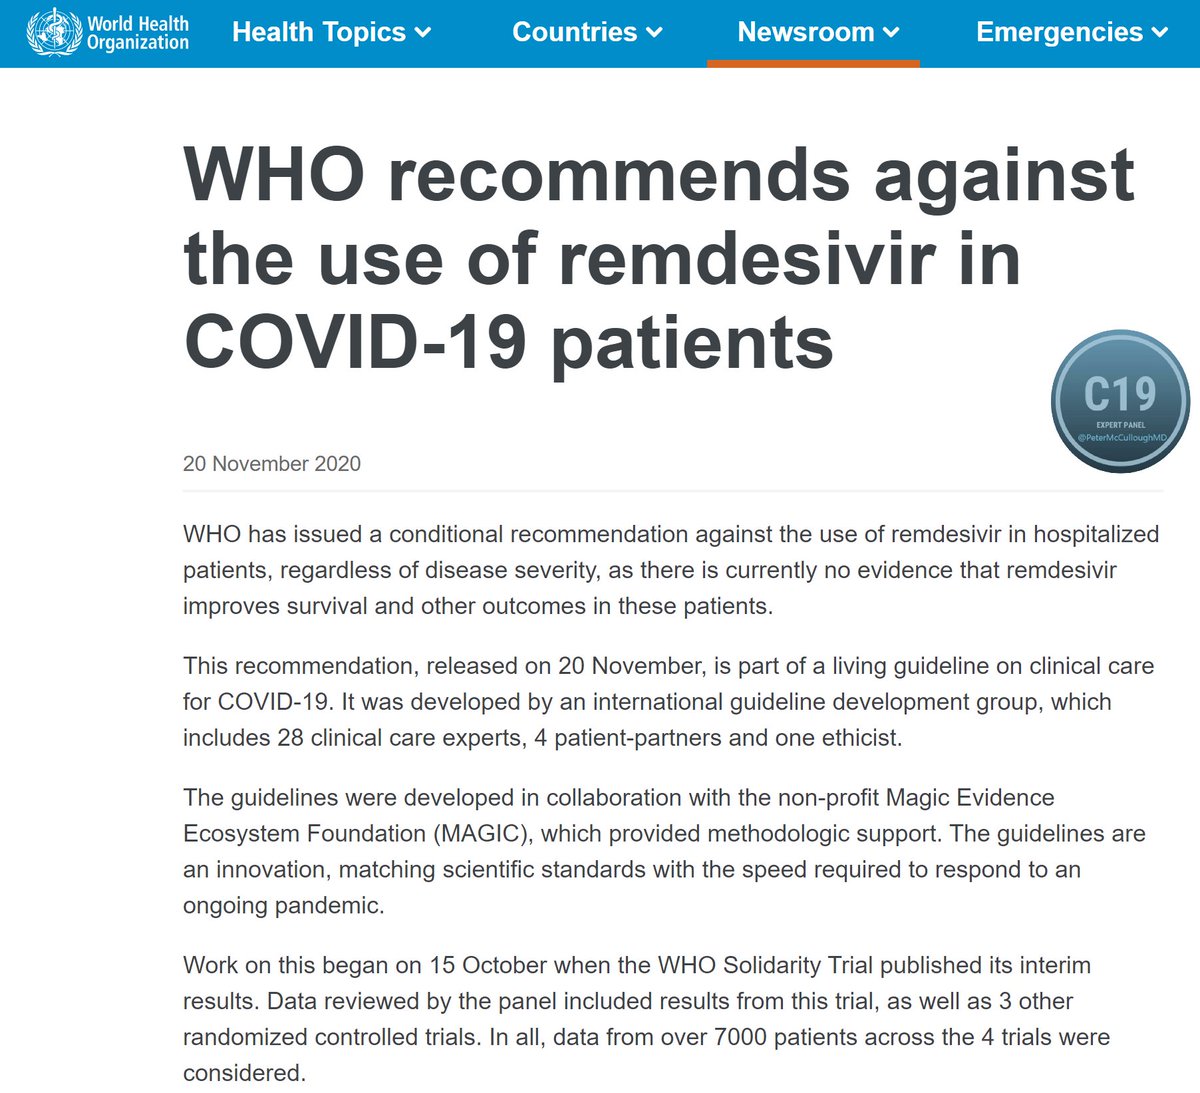 .@WHO said DO NOT USE Remdesivir Nov 20, 2020.  Followup Solidarity Data May 2022 confirmed it has no efficacy only threatens kidney injury and liver damage.  Should have been pulled off hospital formularies Nov 2020. DOI:doi.org/10.1016/S0140-…